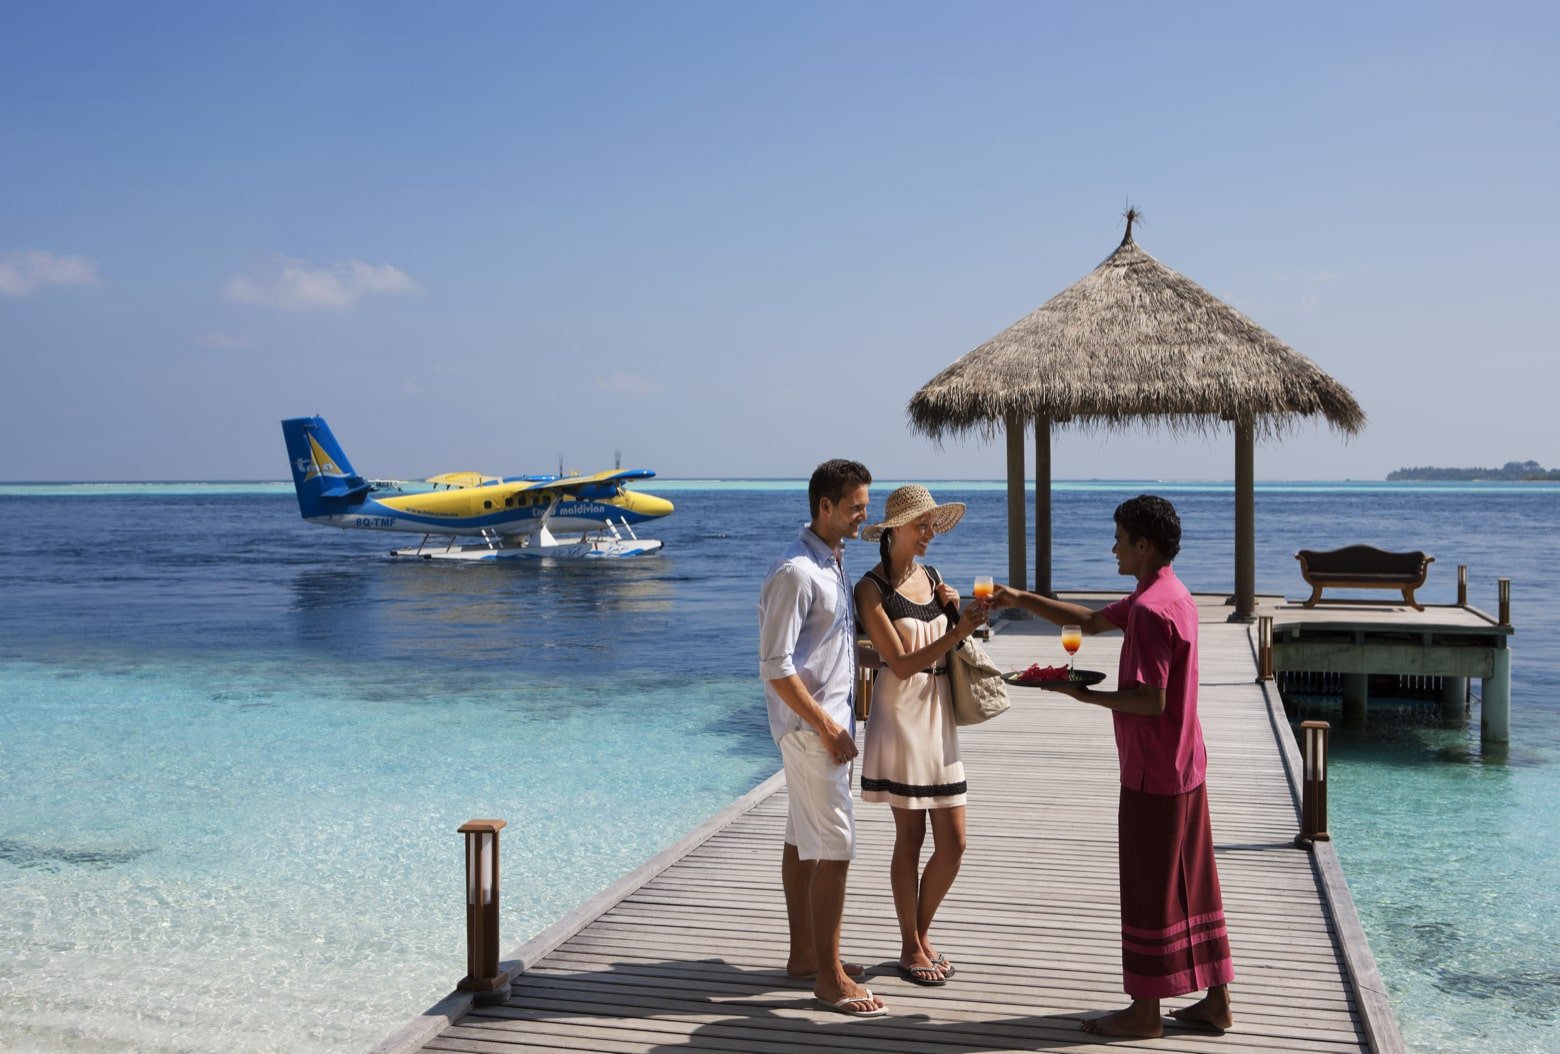 Maldives island package tour - Maldives all inclusive holiday package